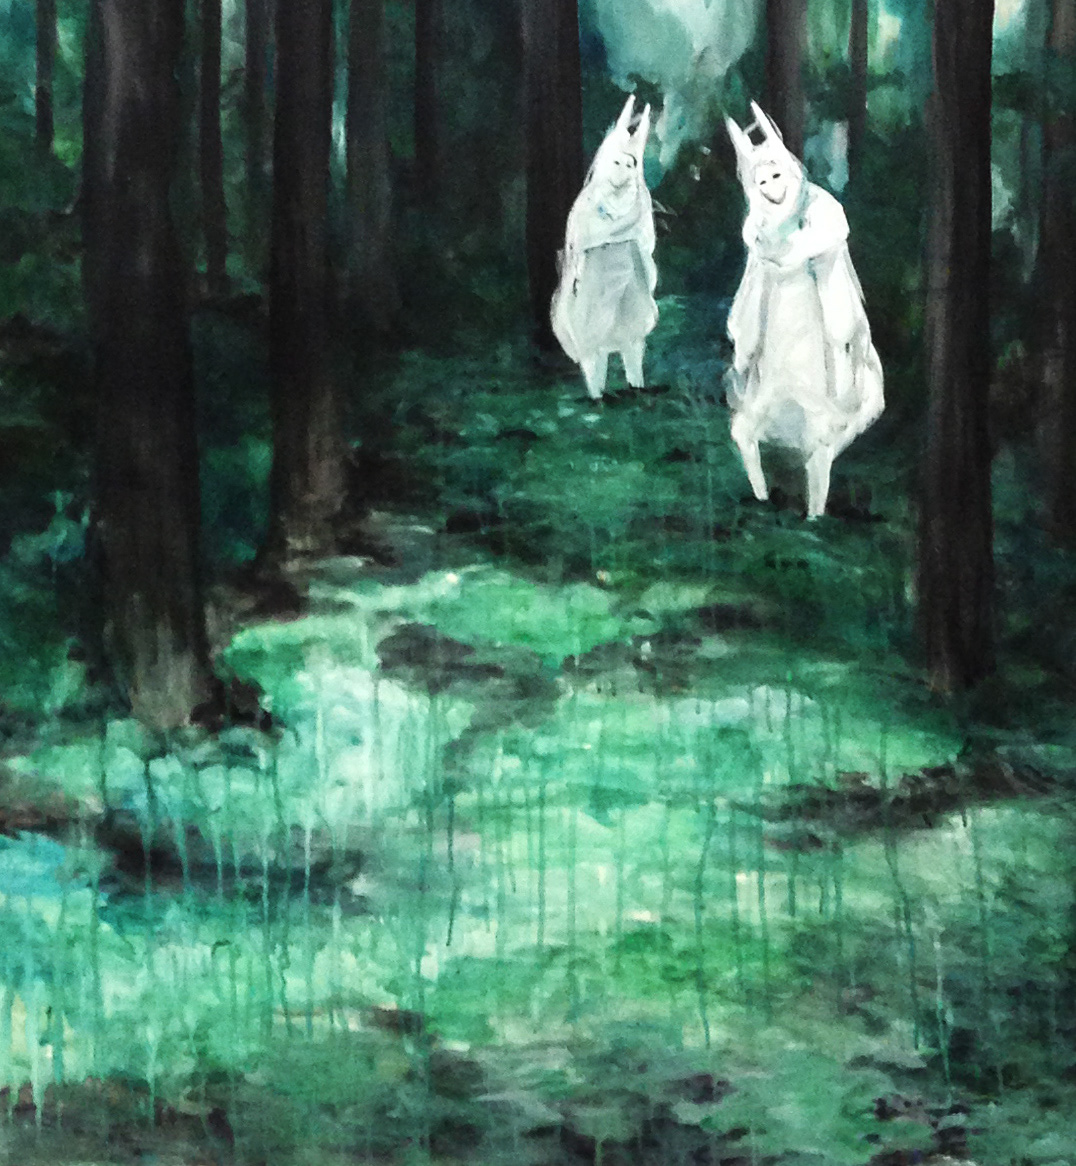 Inside/Outside The Forest forest Lovely Bloodflow baths Forest Spirits large paintings forest scene Sara K Dunn Inspired by music forest pattern nature pattern